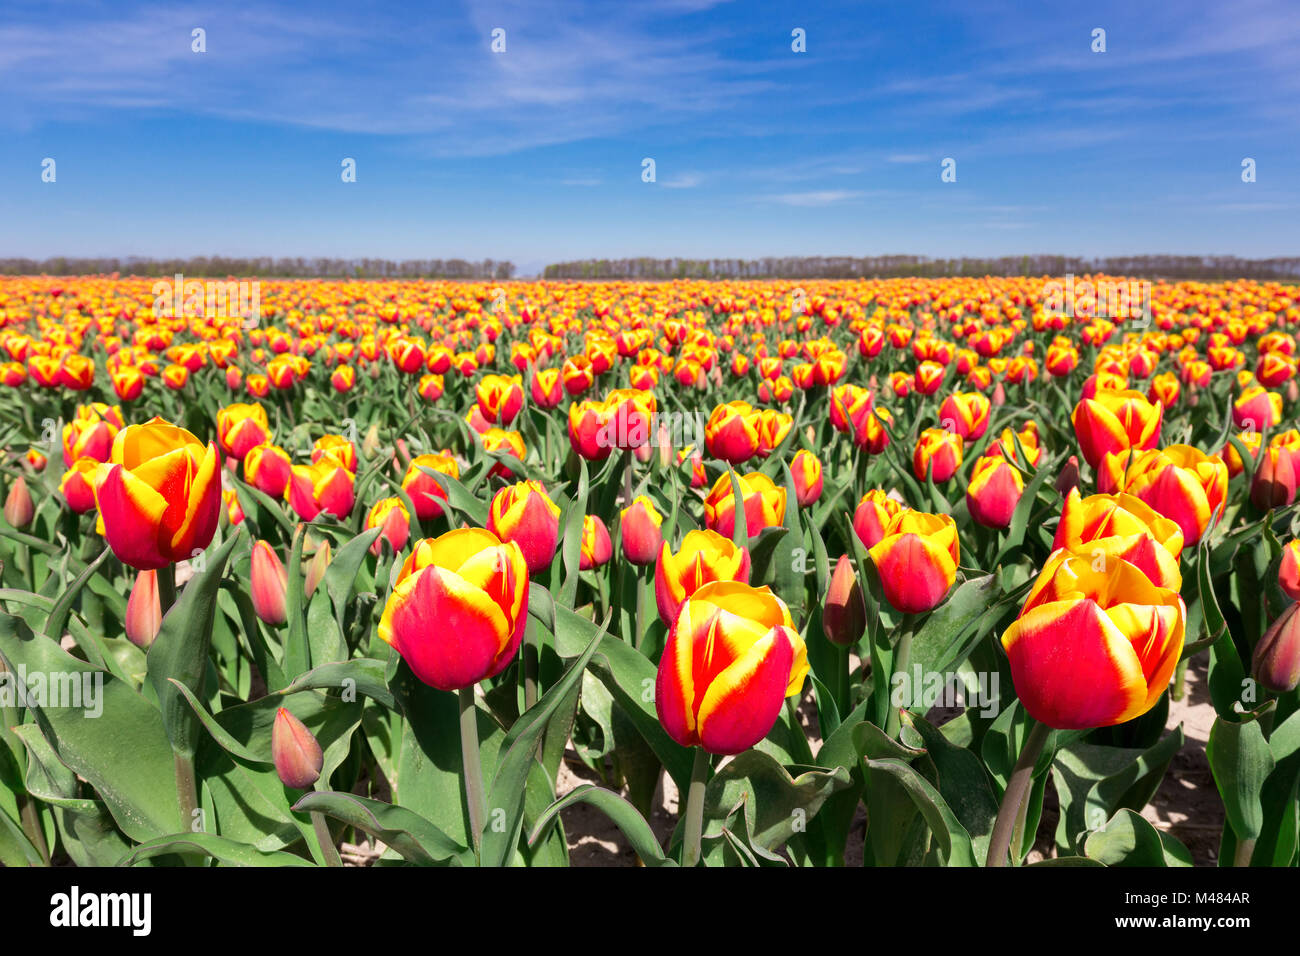 Field of red yellow tulips with blue sky in holland Stock Photo